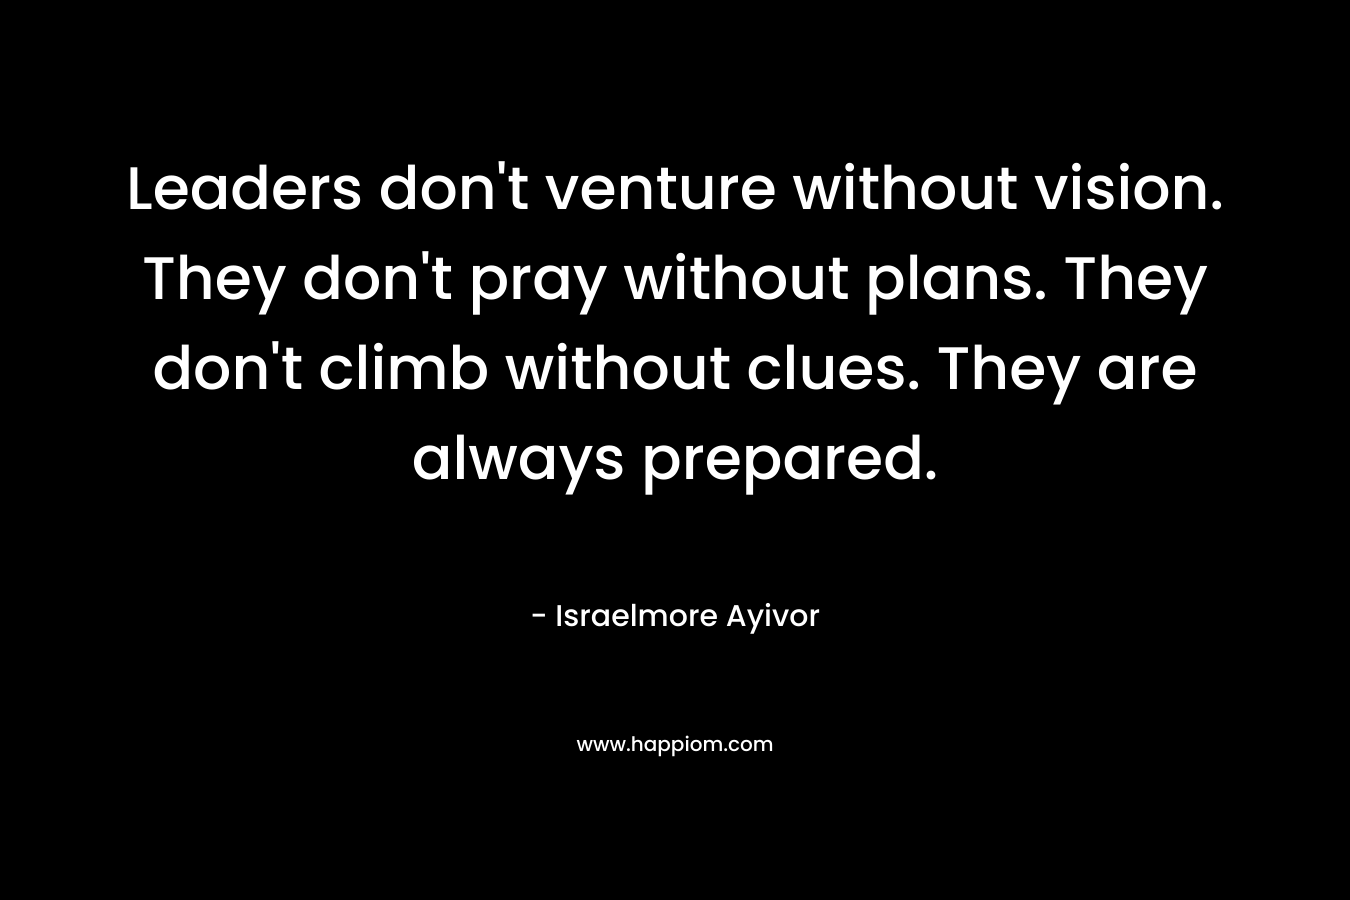 Leaders don't venture without vision. They don't pray without plans. They don't climb without clues. They are always prepared.